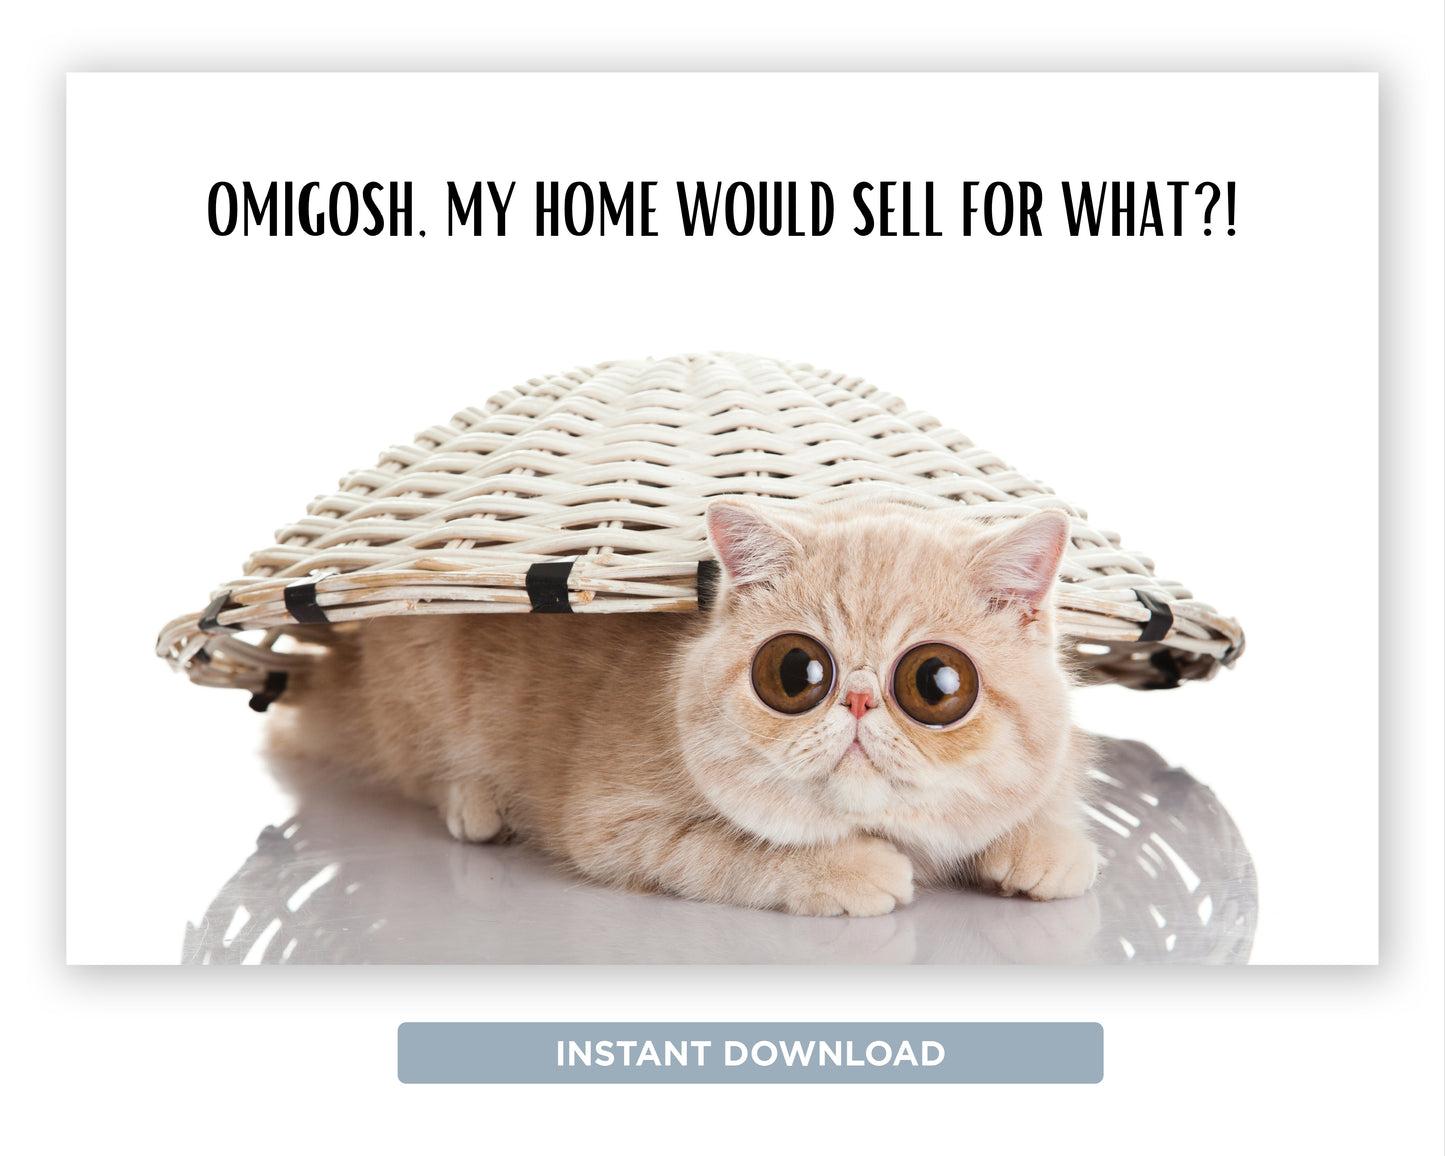 OMG My Home Would Sell For What?! | Funny Real Estate Referral Postcard Download